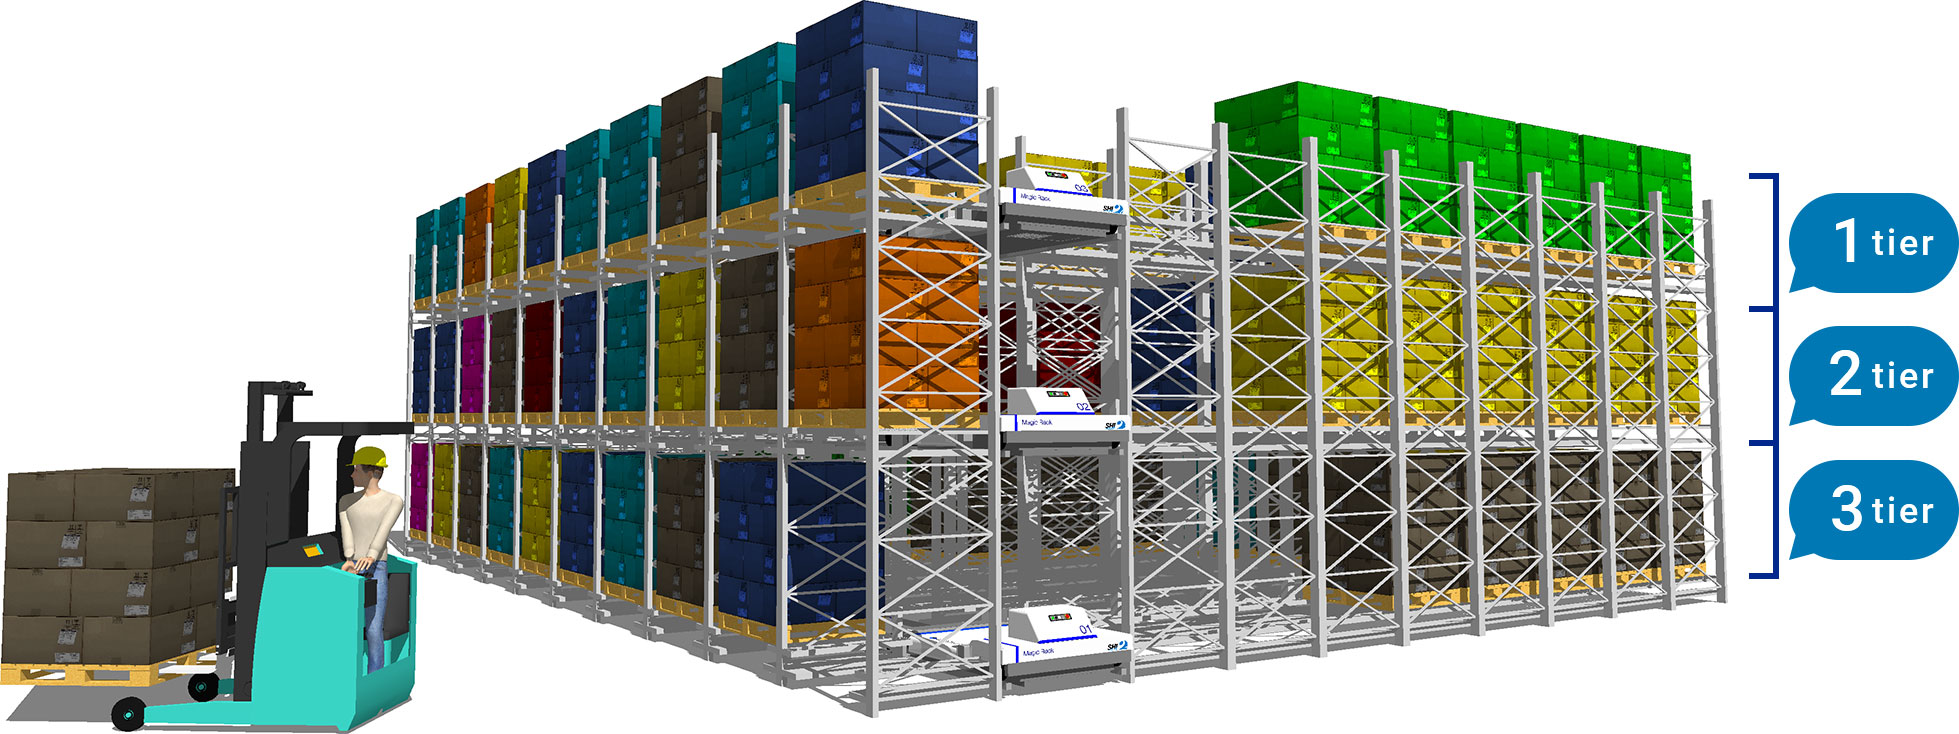 Magic Shuttle, with the world's slimmest design, will enable three-level storage for 1.5m height pallets in a warehouse with a 5.5m ceiling height.